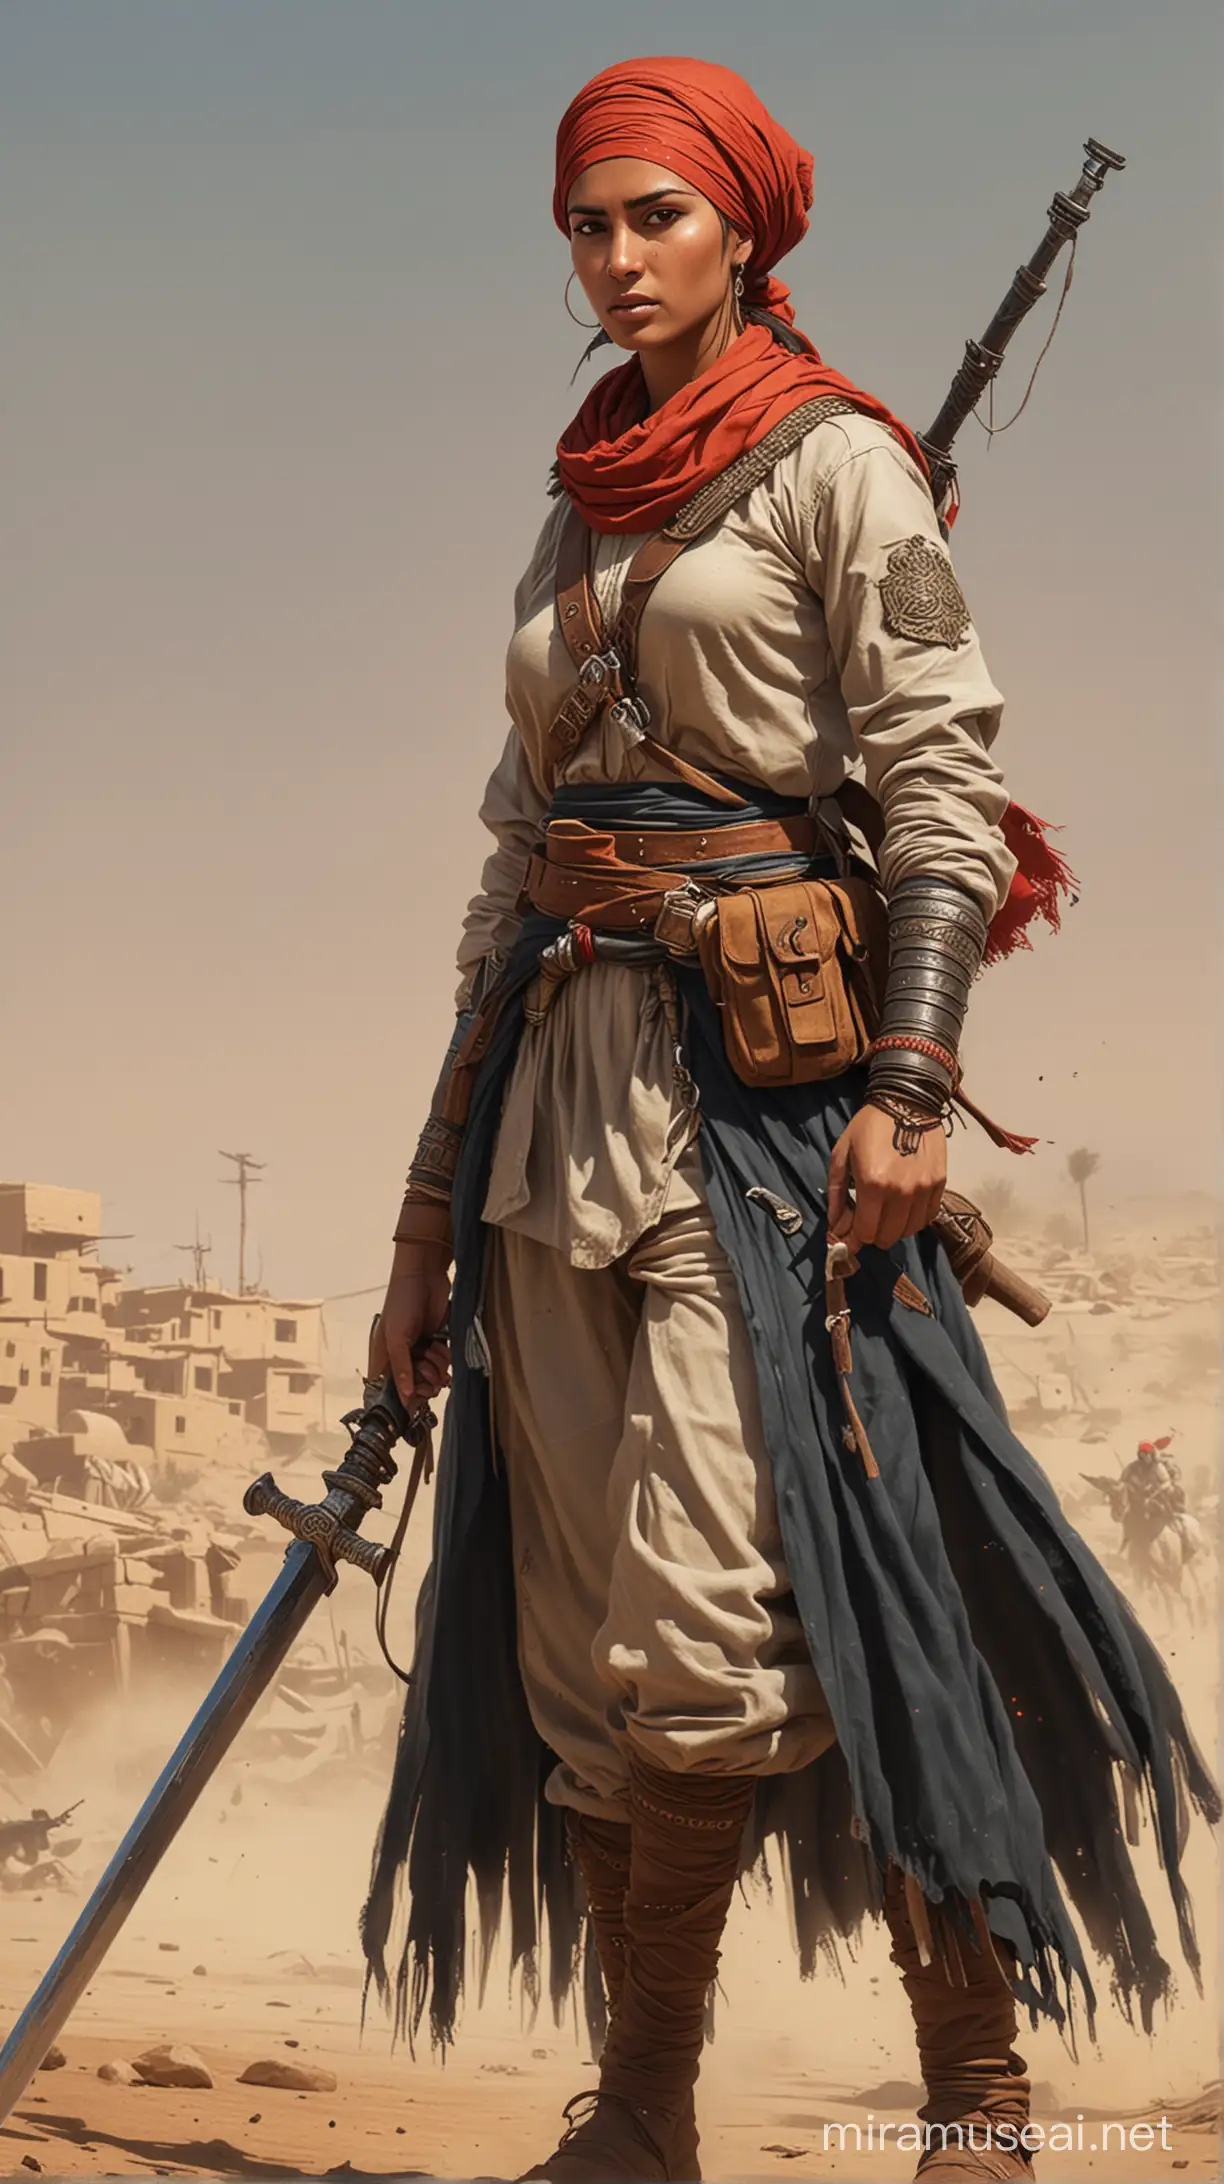 Illustrate a scene where Nene Hatun bravely engages in combat, boldly advancing into battle against the enemy. Show her standing at the forefront with her weapon, displaying a determined expression amidst the intense conflict. turbaned

